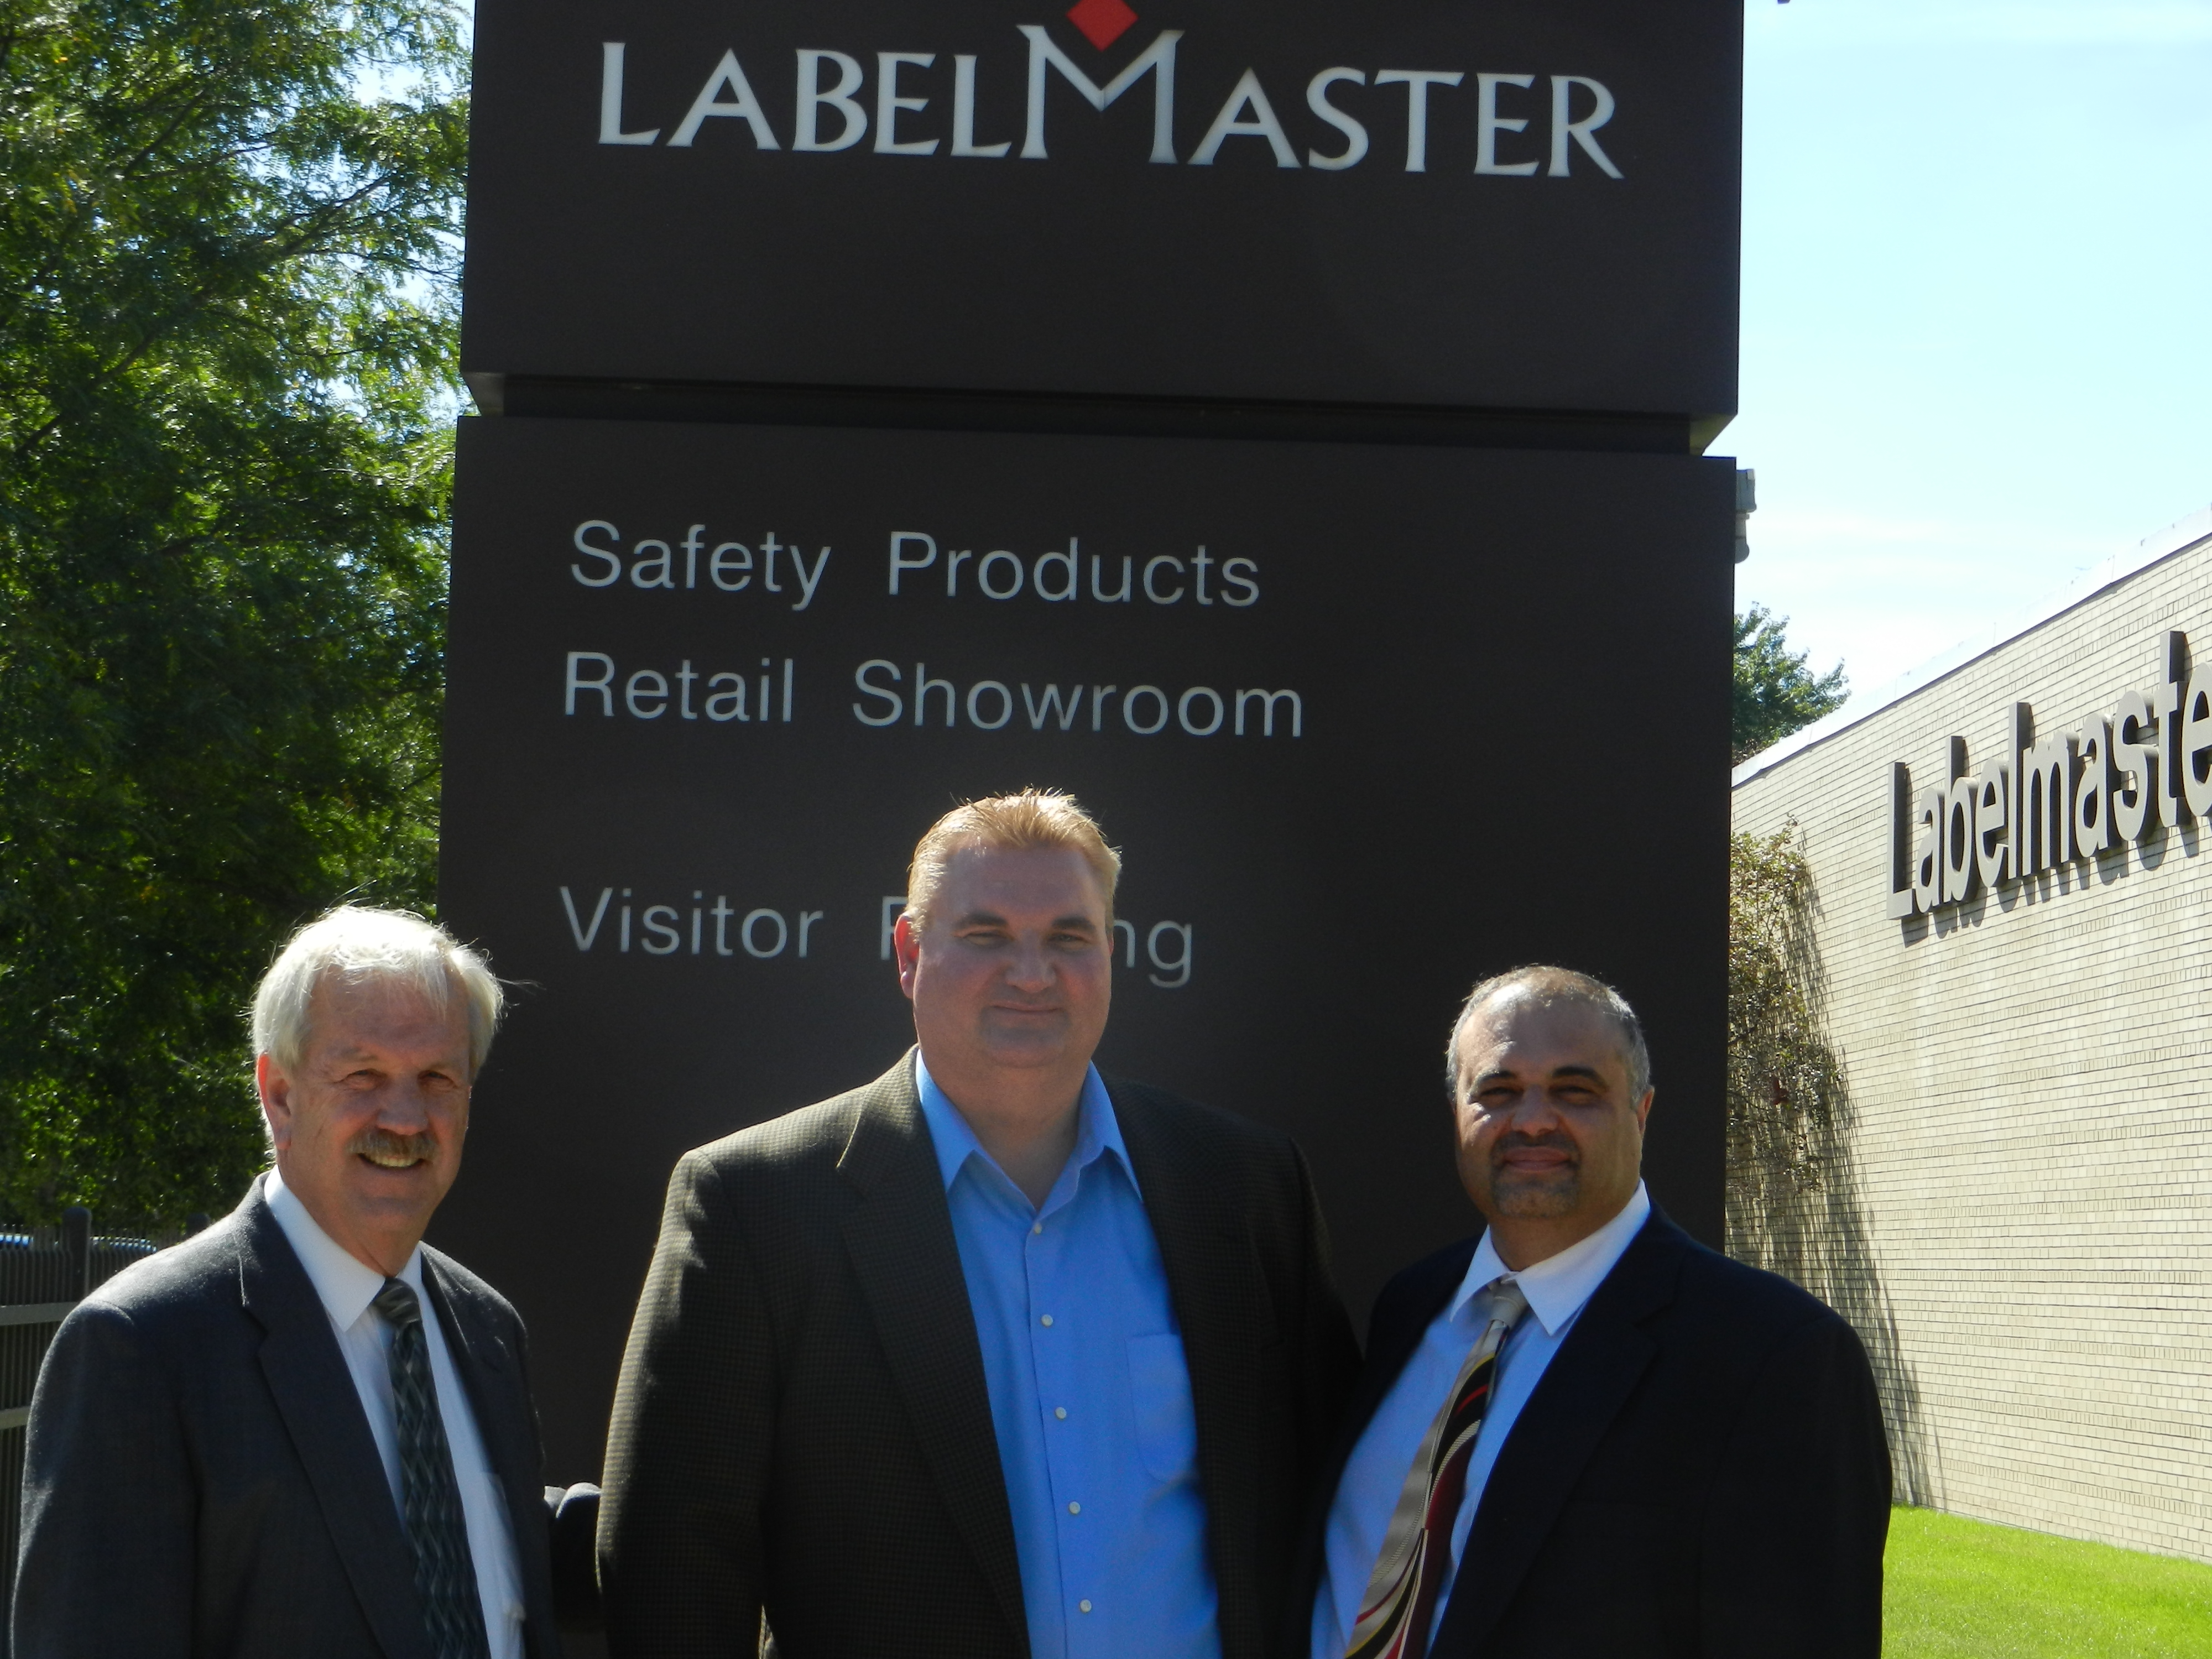 Labelmaster Product Manager Jim Battles with Koorosh Vafadari President/ Owner G2G International, LLC and Terry Mauger President/ Owner Dickey Manufacturing